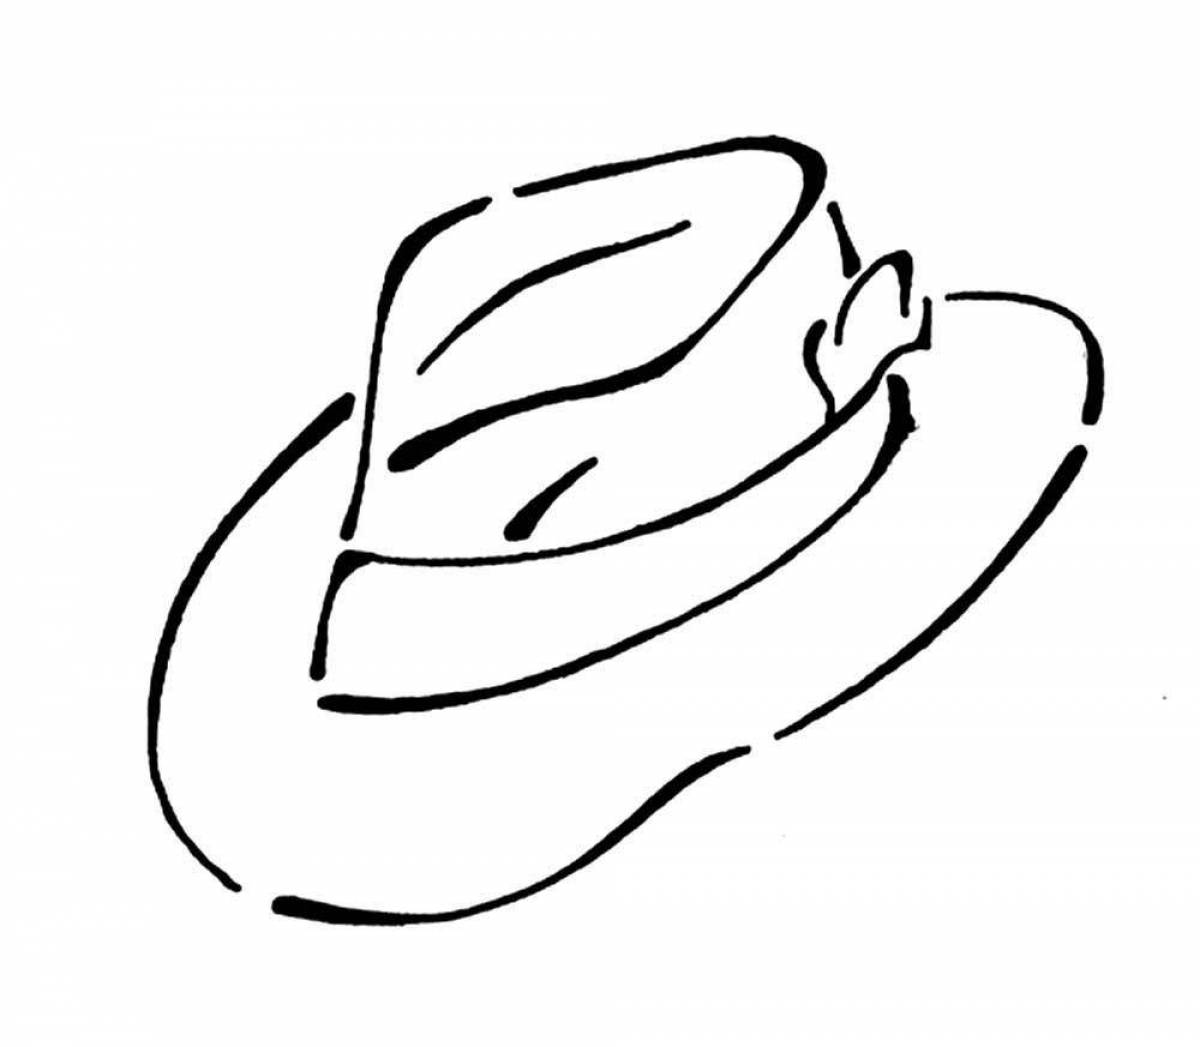 Attractive living hat coloring book